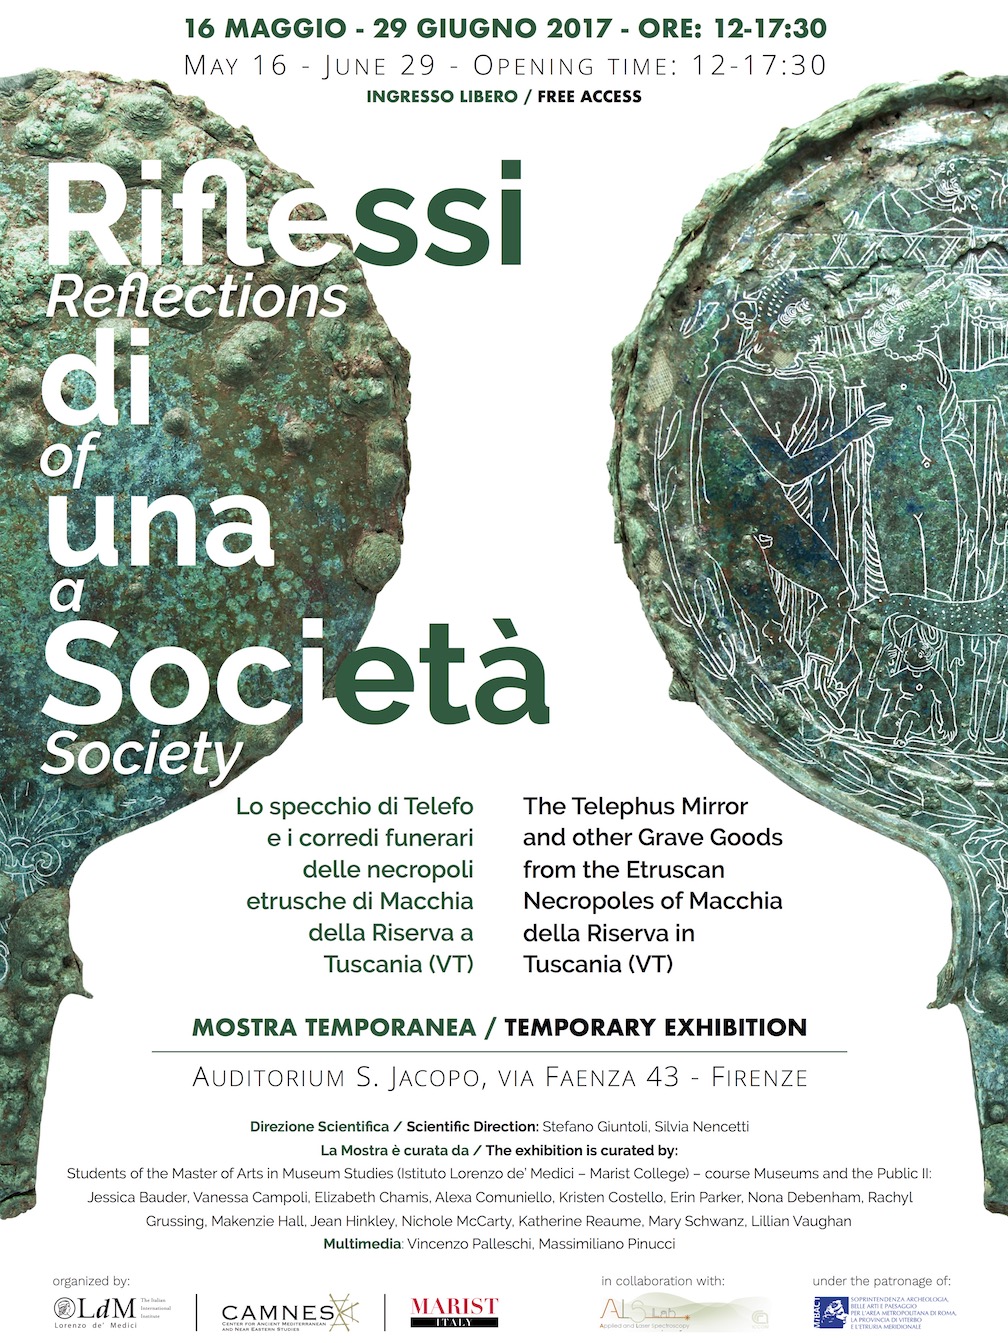 EXHIBITION: "Reflections of a Society"